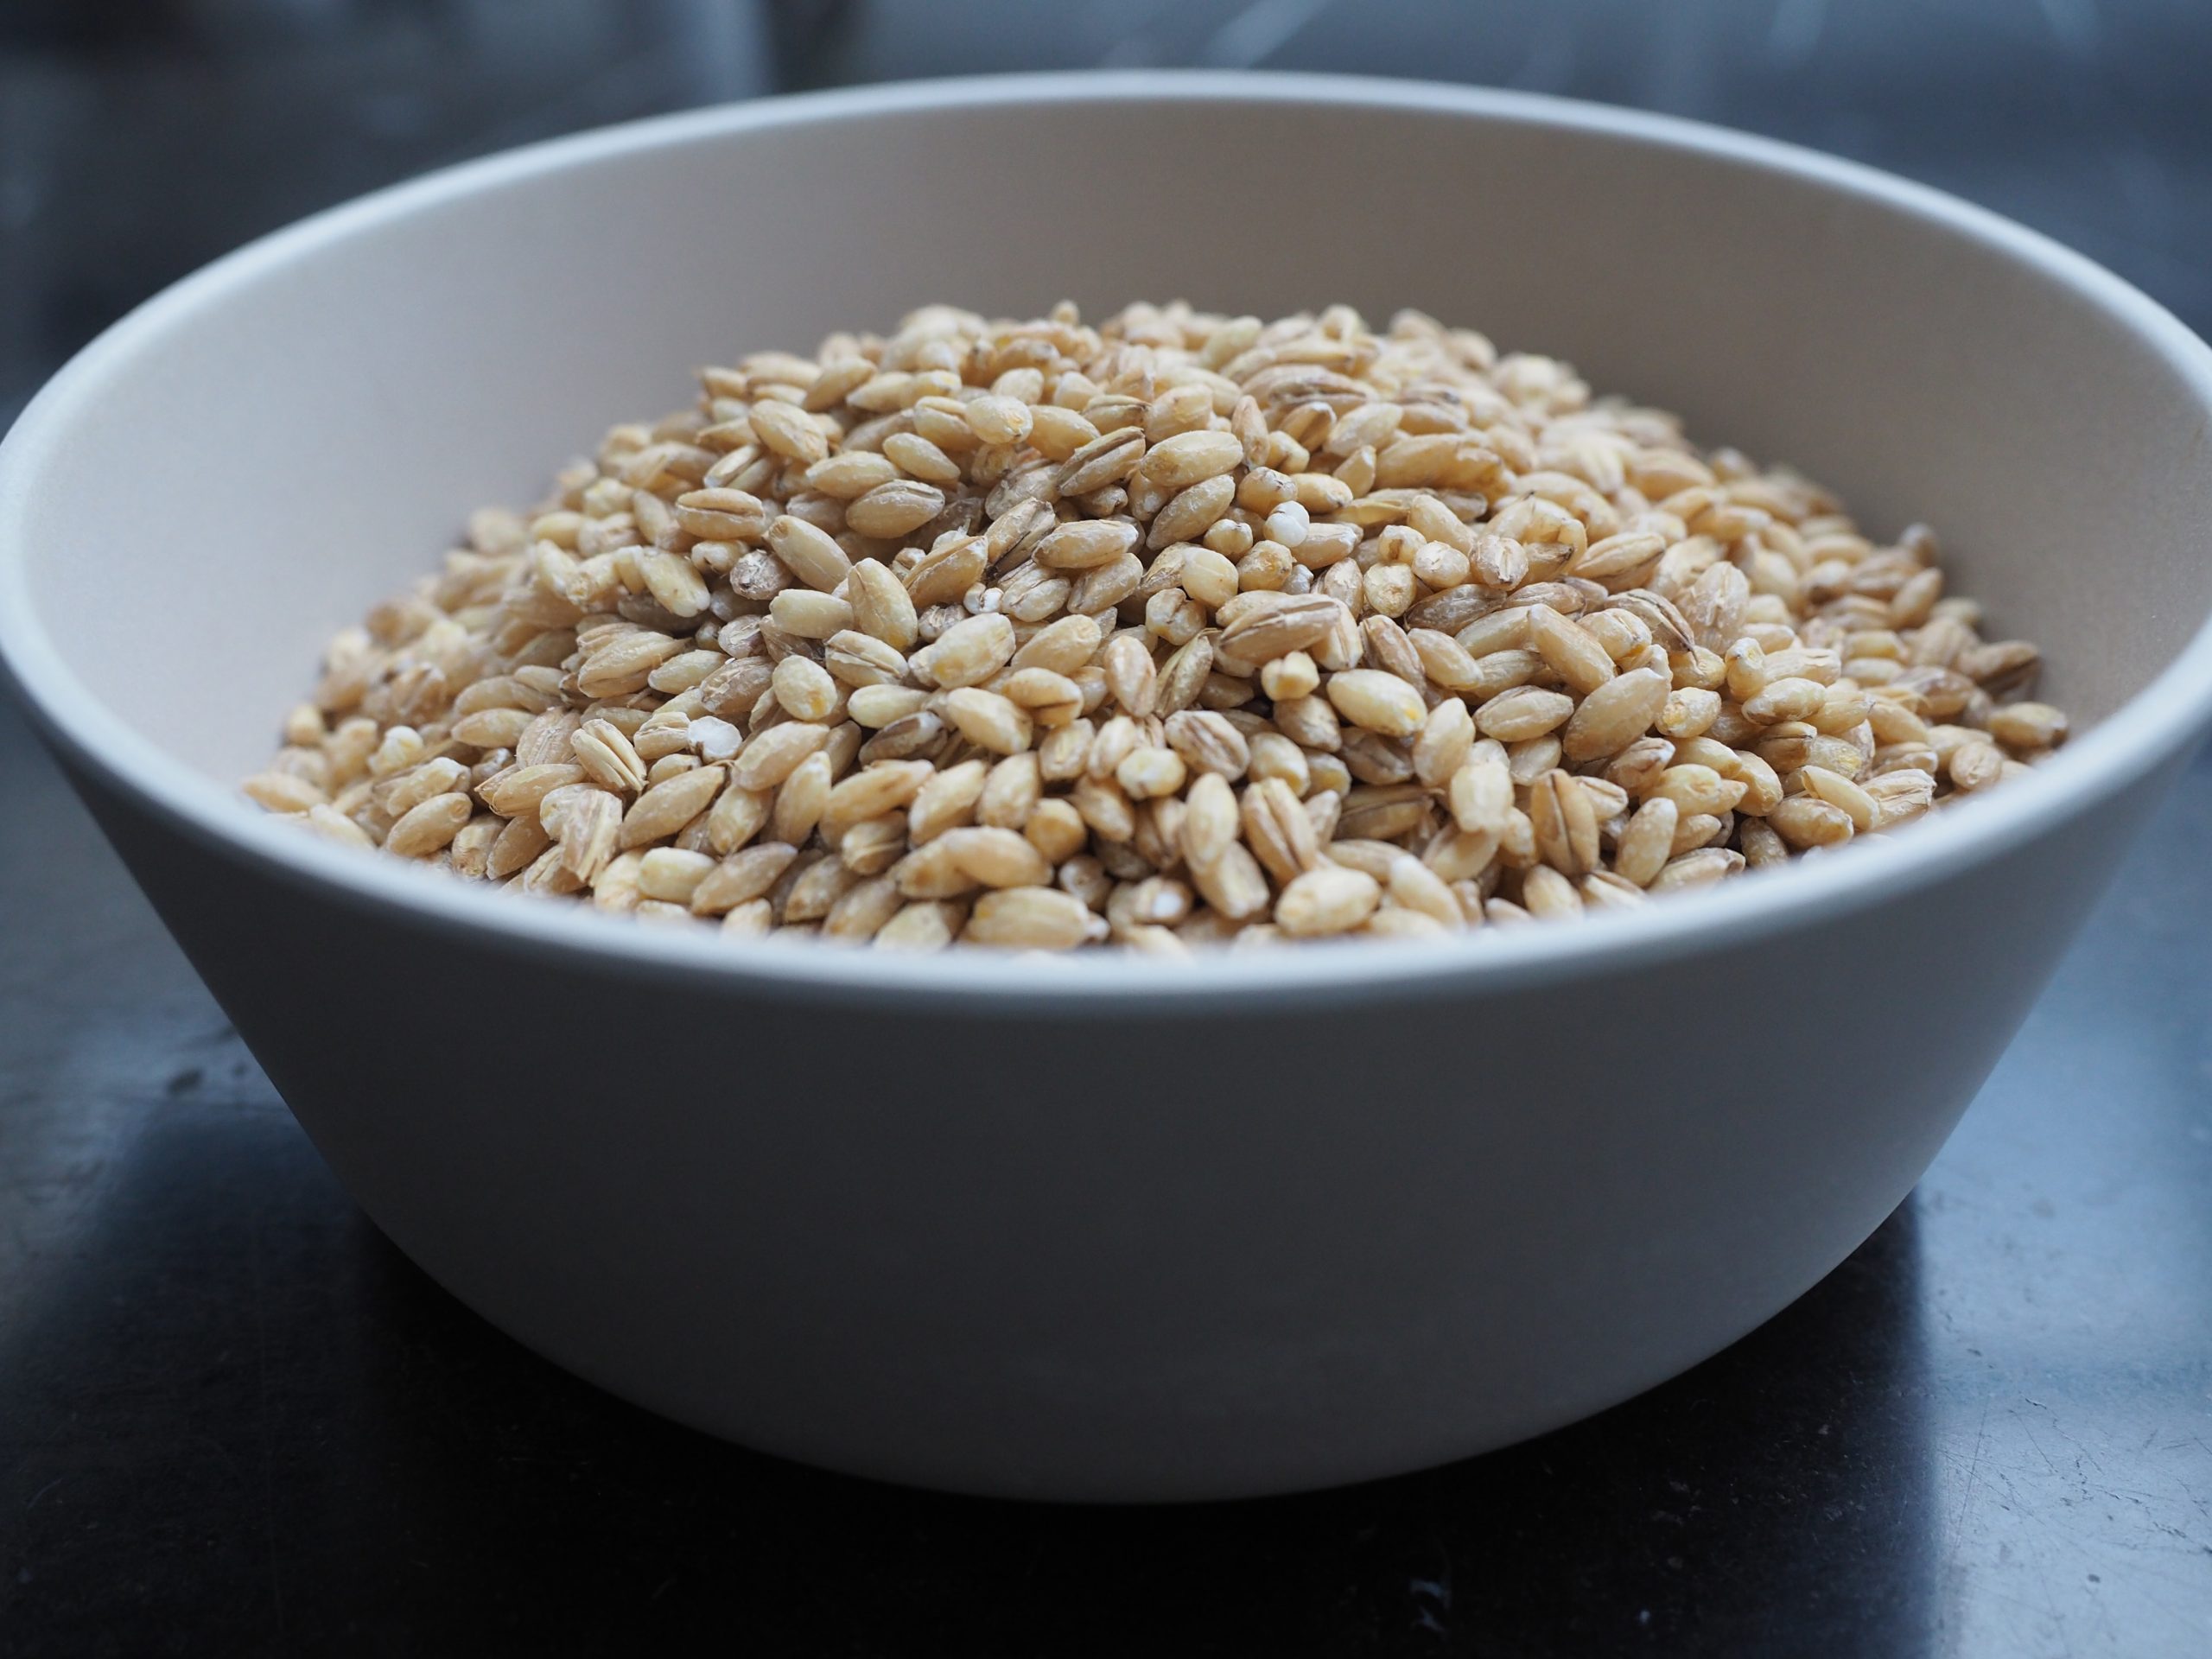 Barley: the greatest natural source of Beta-glucans